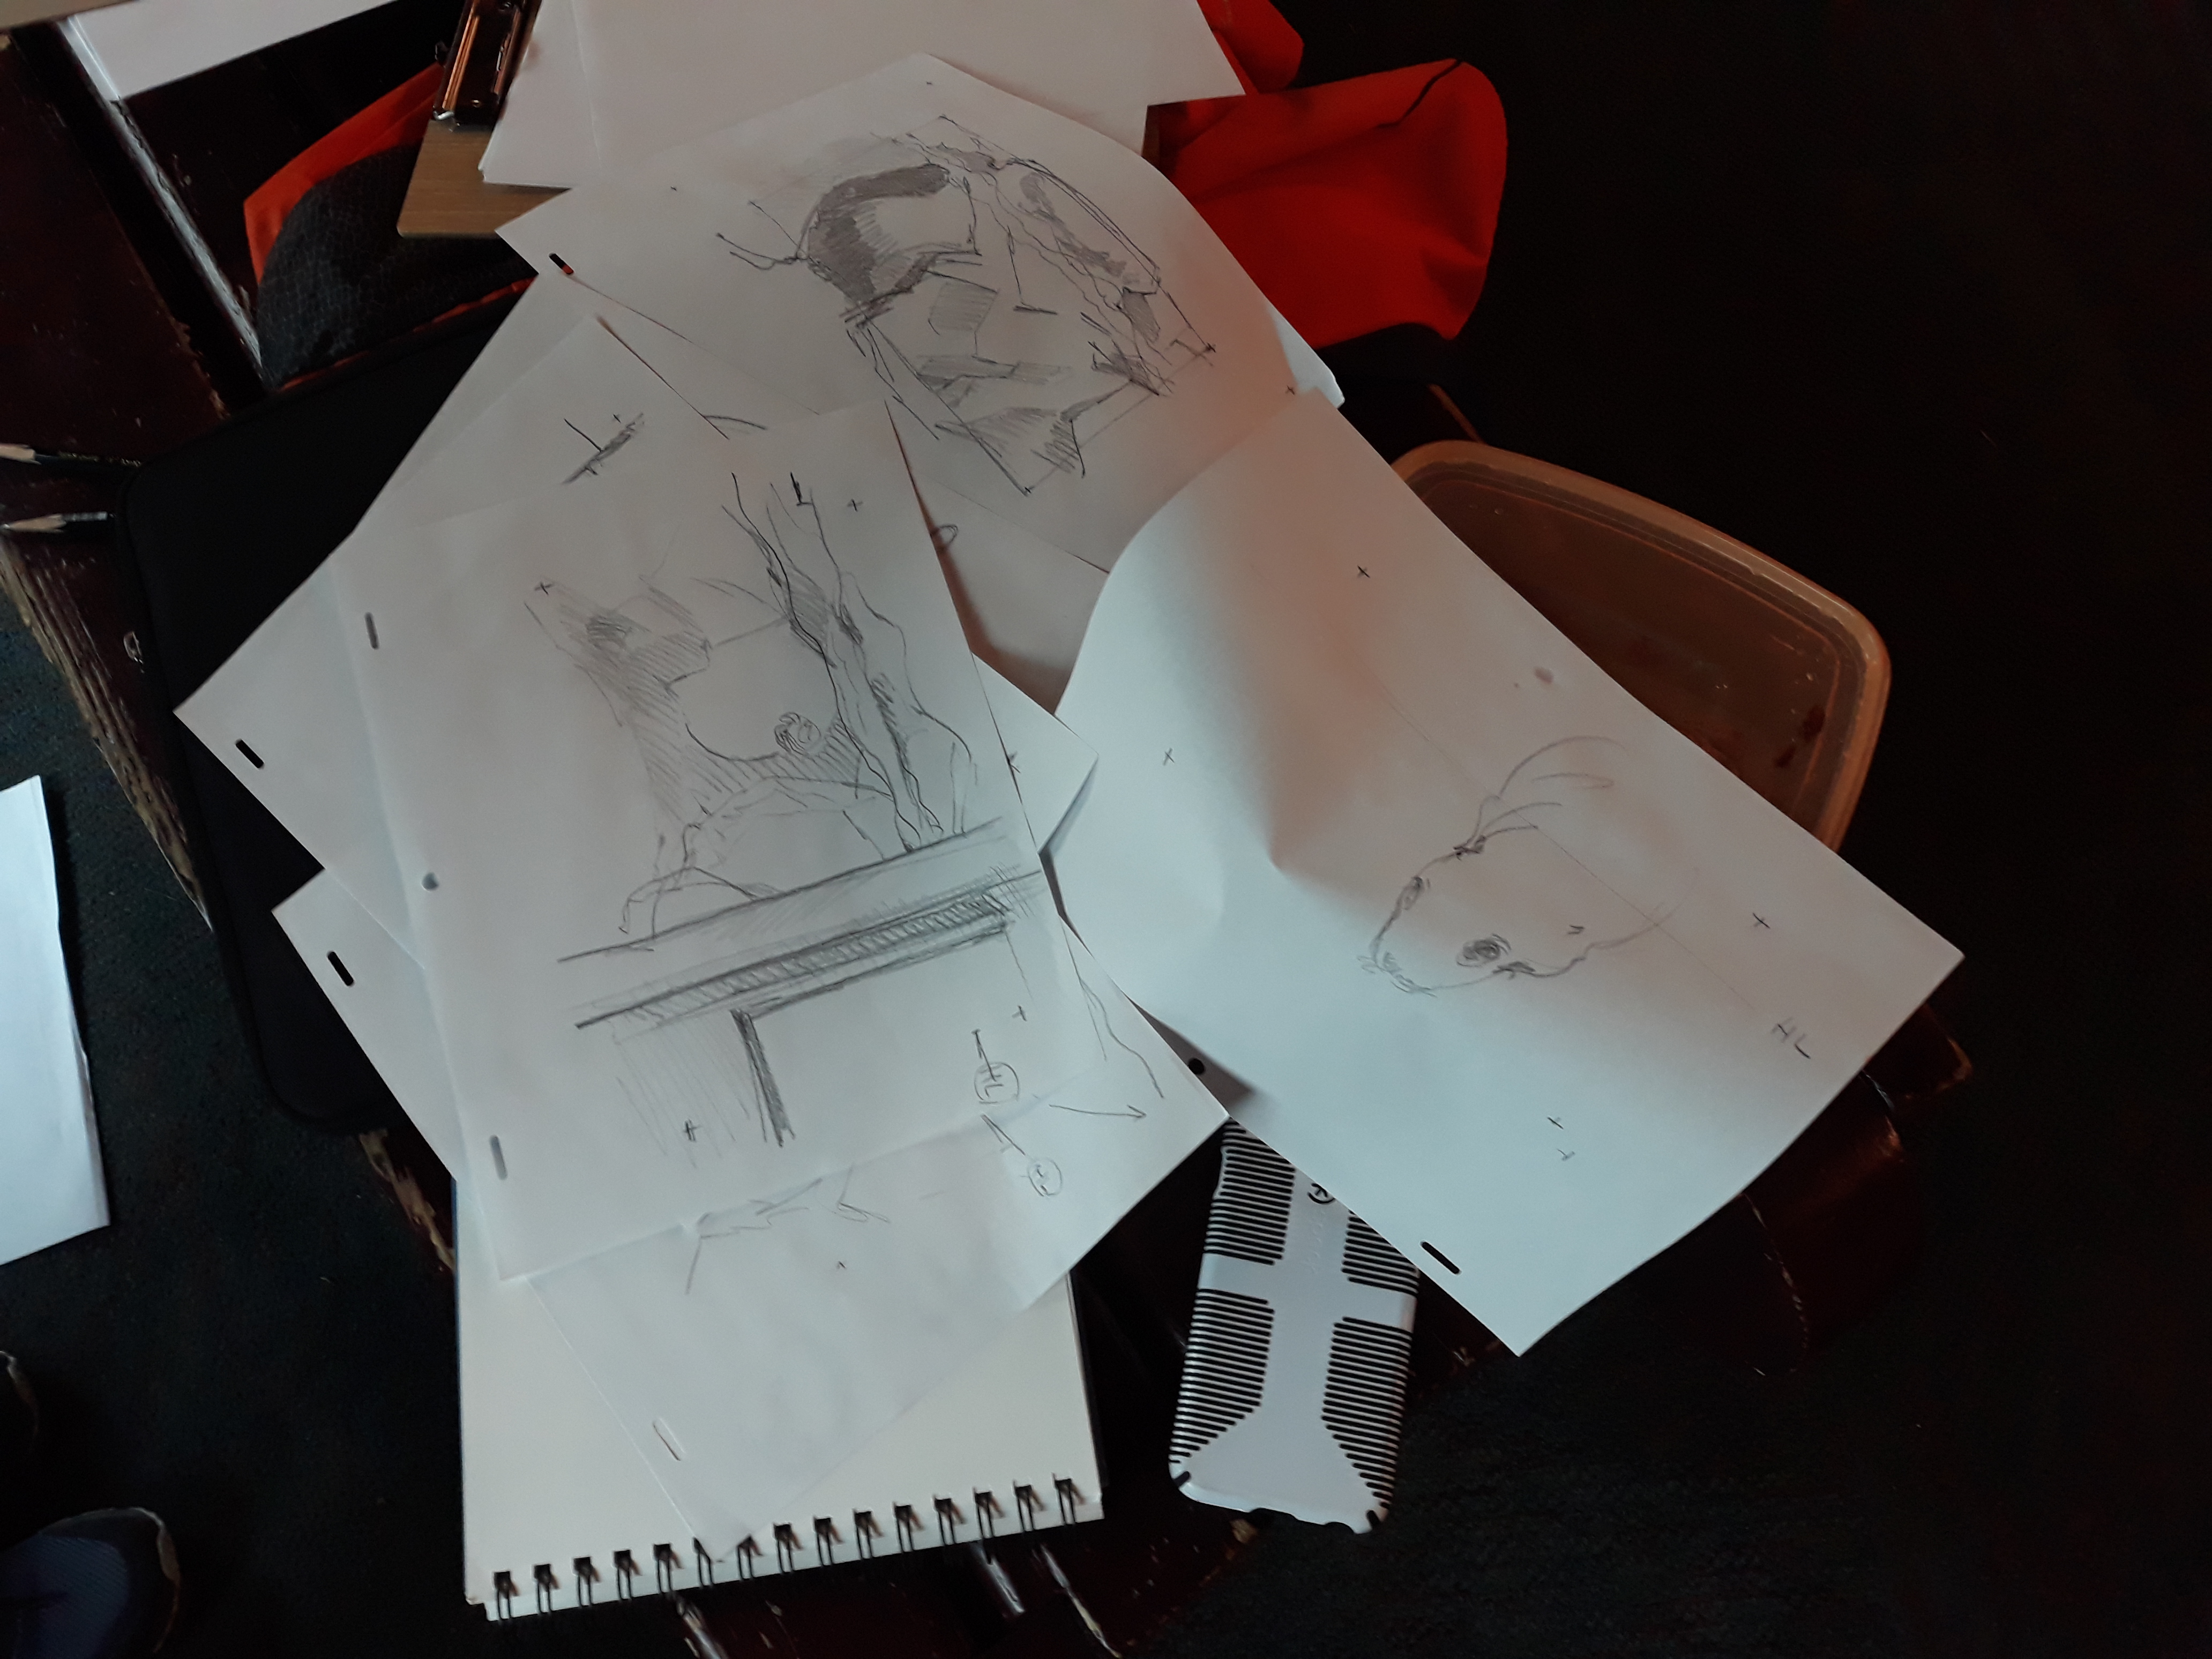 Paper is strewn on a bench, displaying some of the observational drawings of the seals movment.